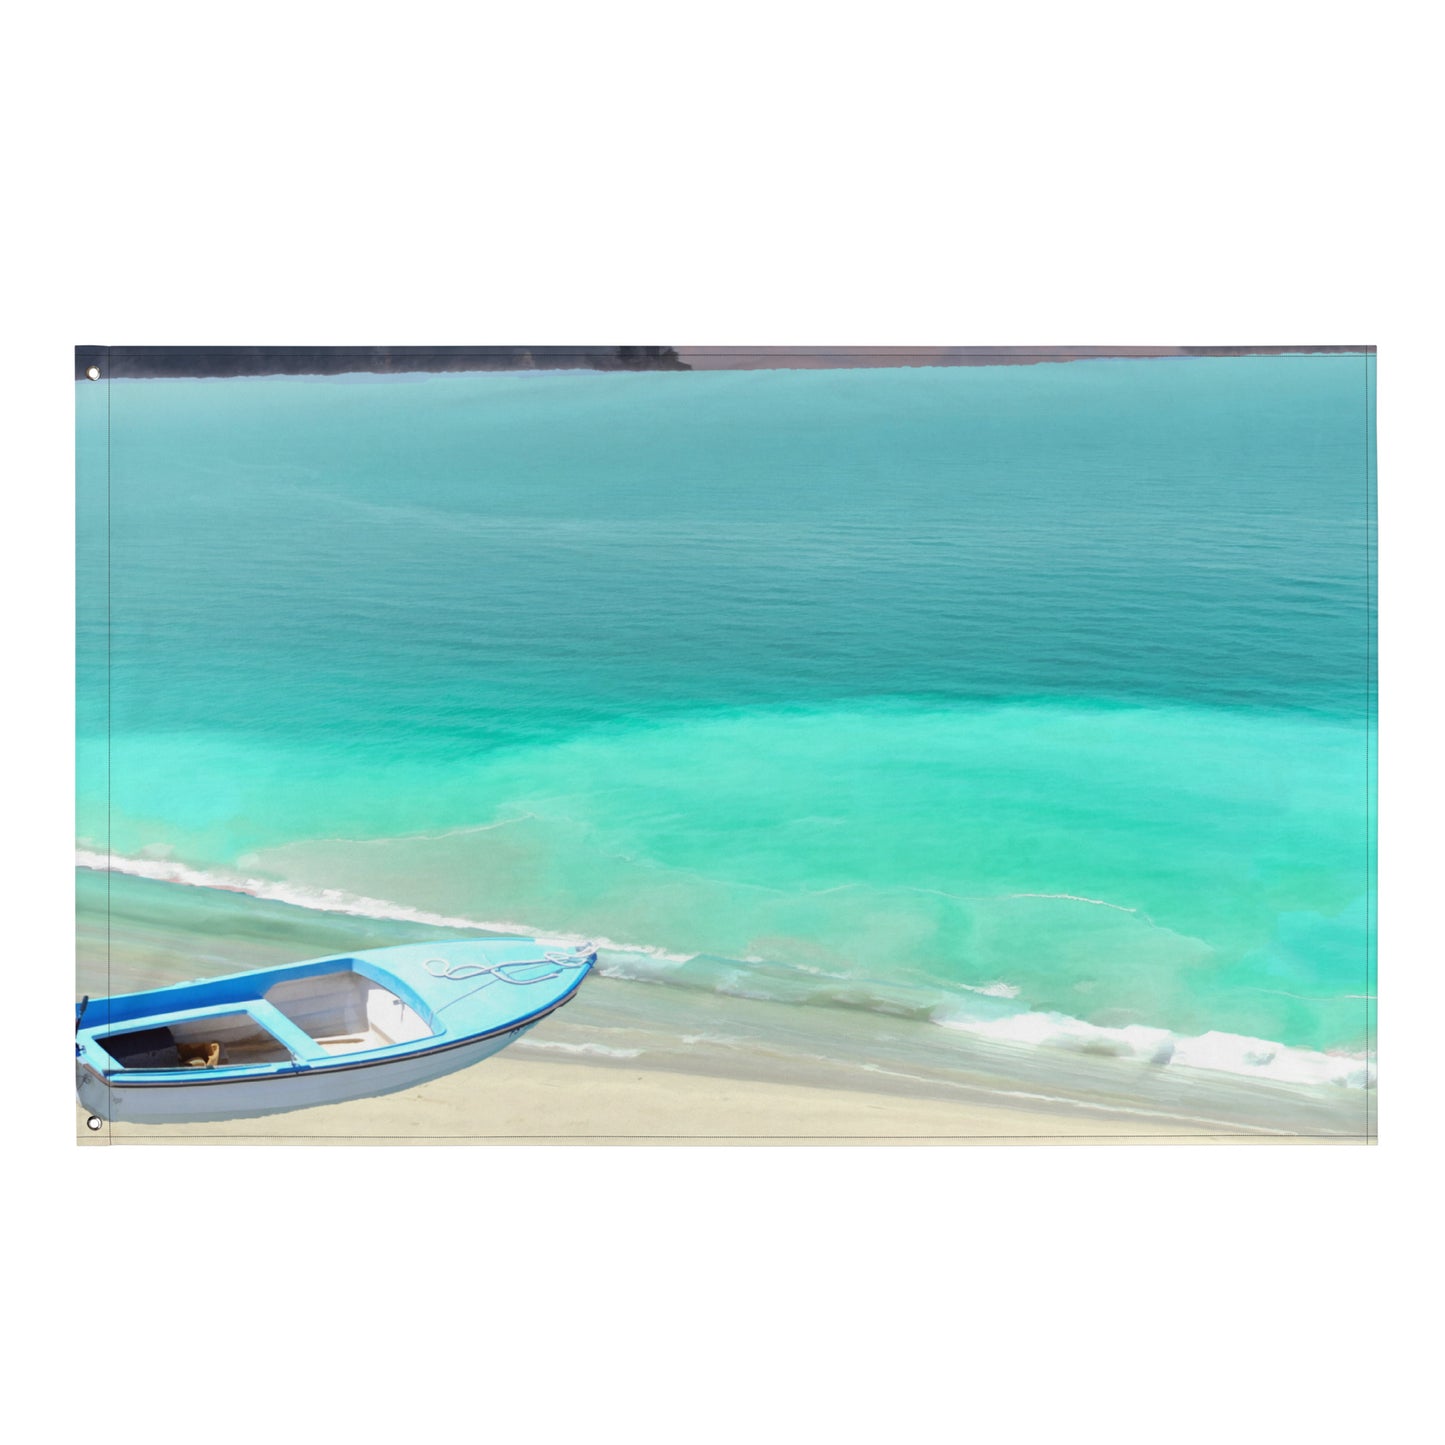 Boat and Beach Painting Flag Tapestry